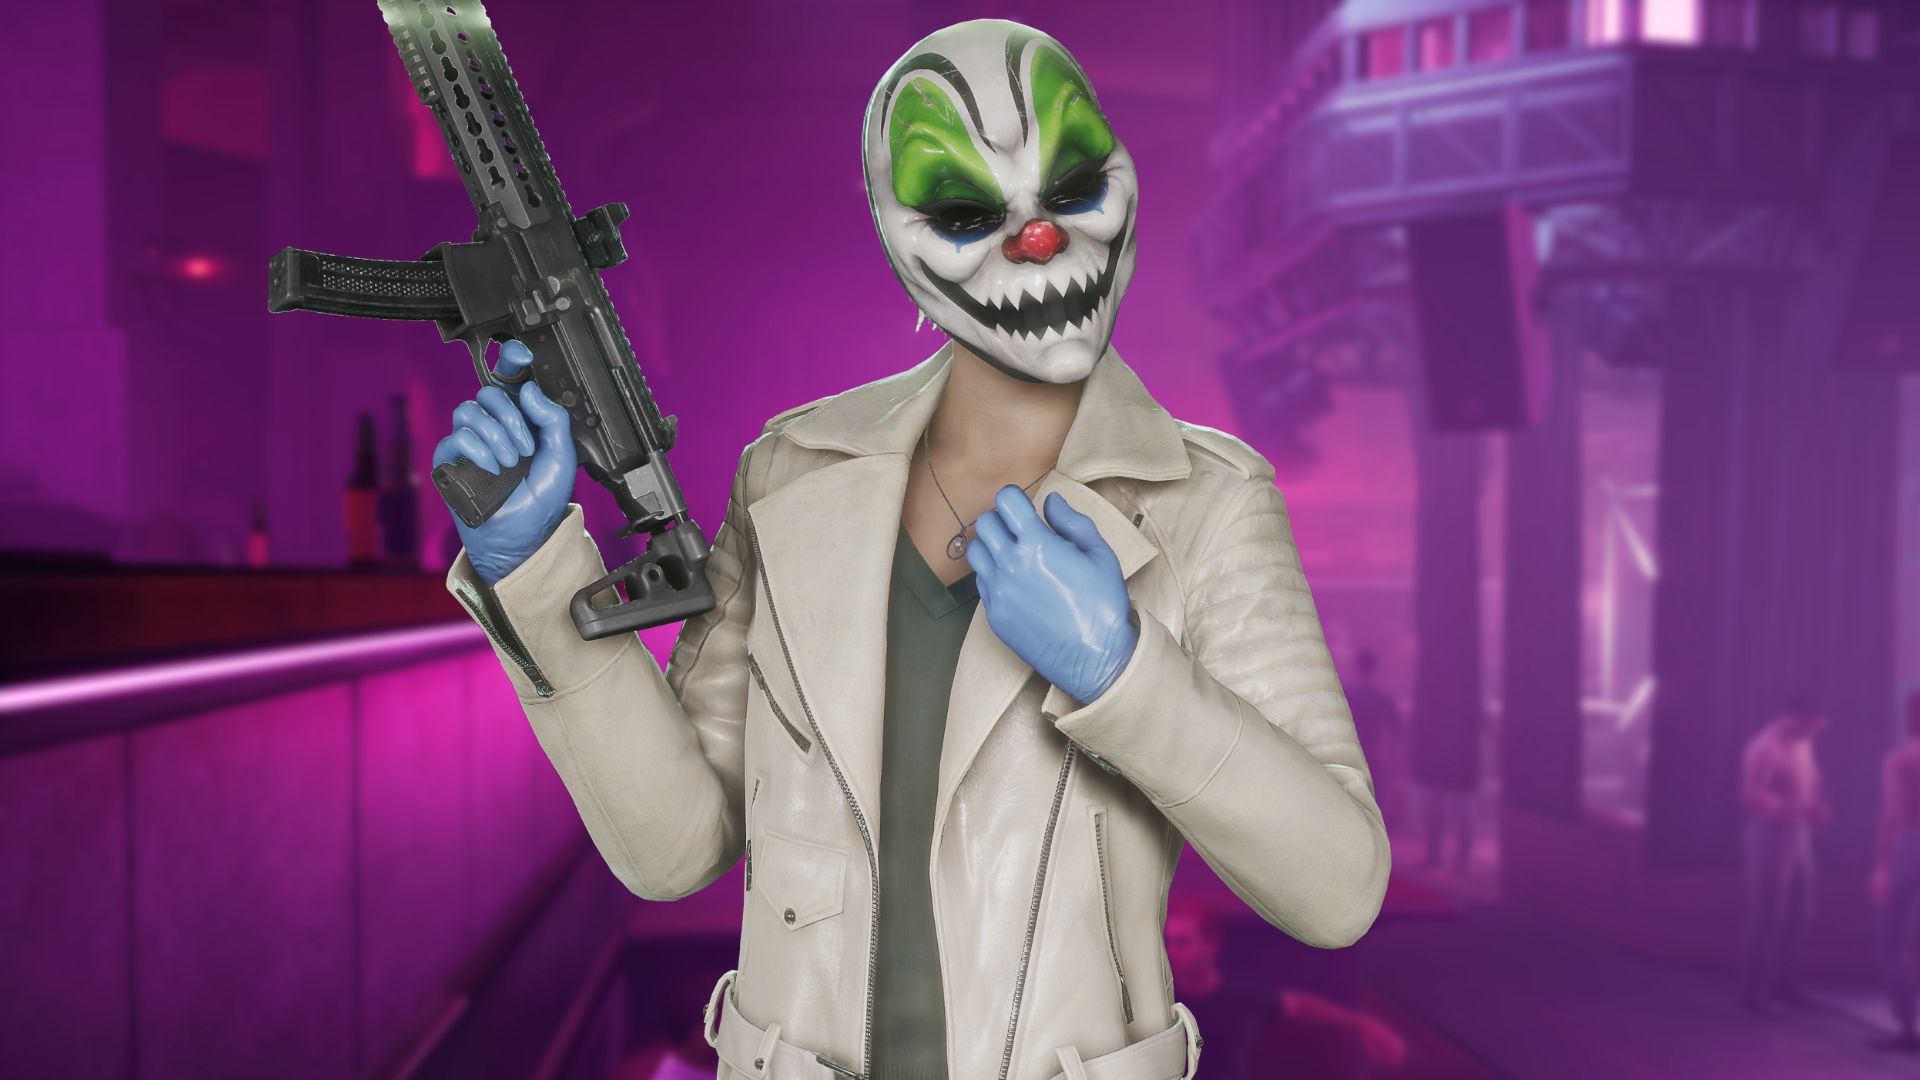 Payday 3: is Matchmaking broken? How to check when the servers